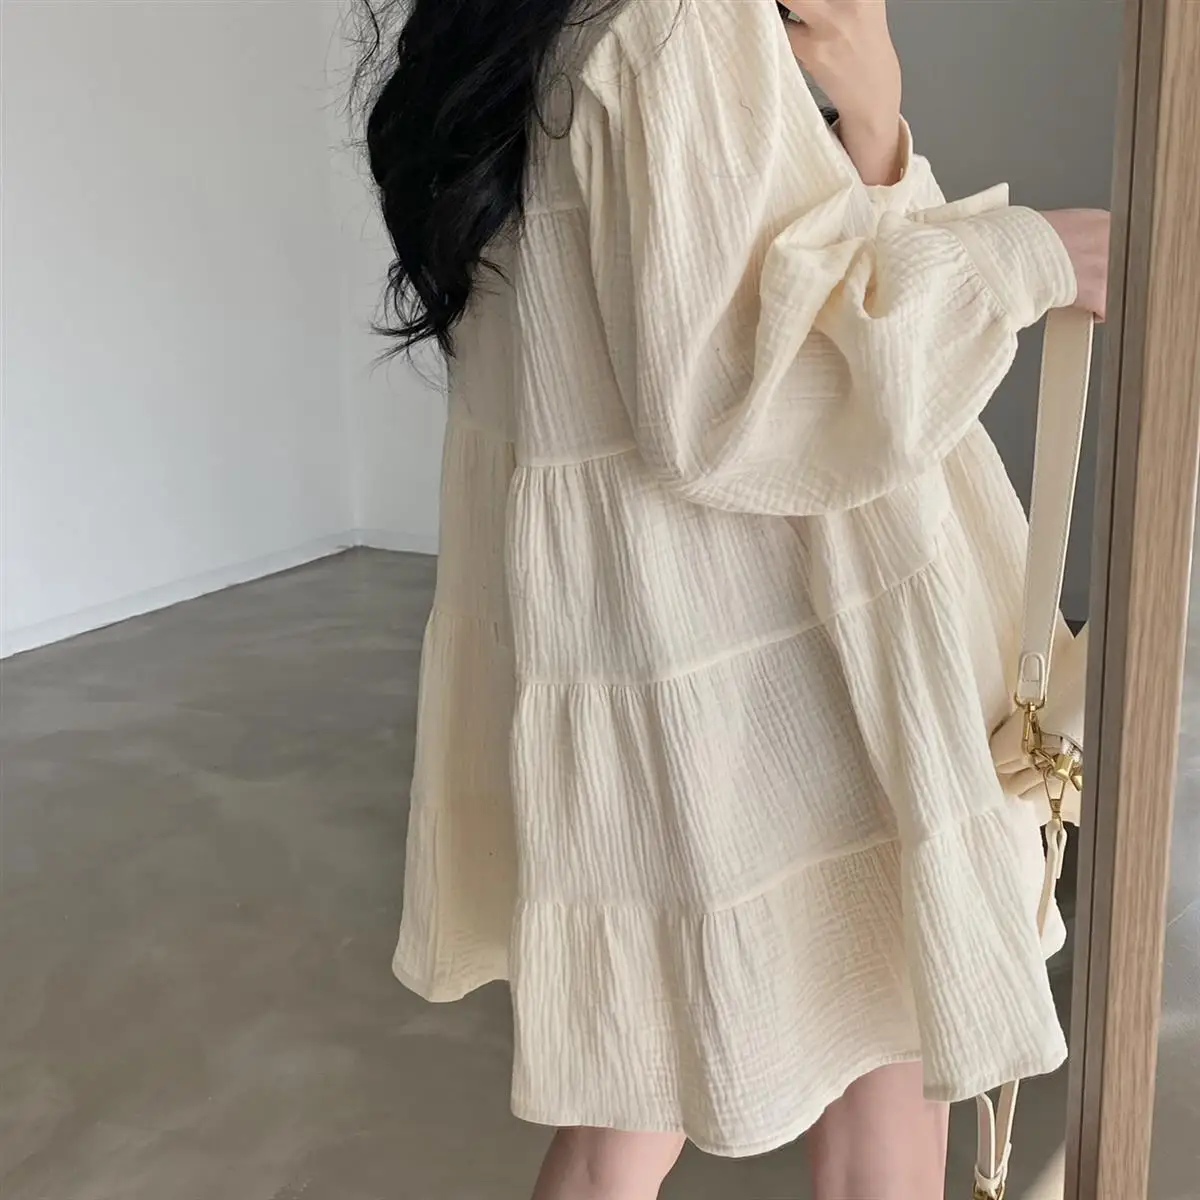 Long Sleeve Dress Women Ins Ulzzang Spring Lovely Solid A-line Ruffles Korean Apricot Fashion Retro Turn-down Collar  Clothes boho dresses